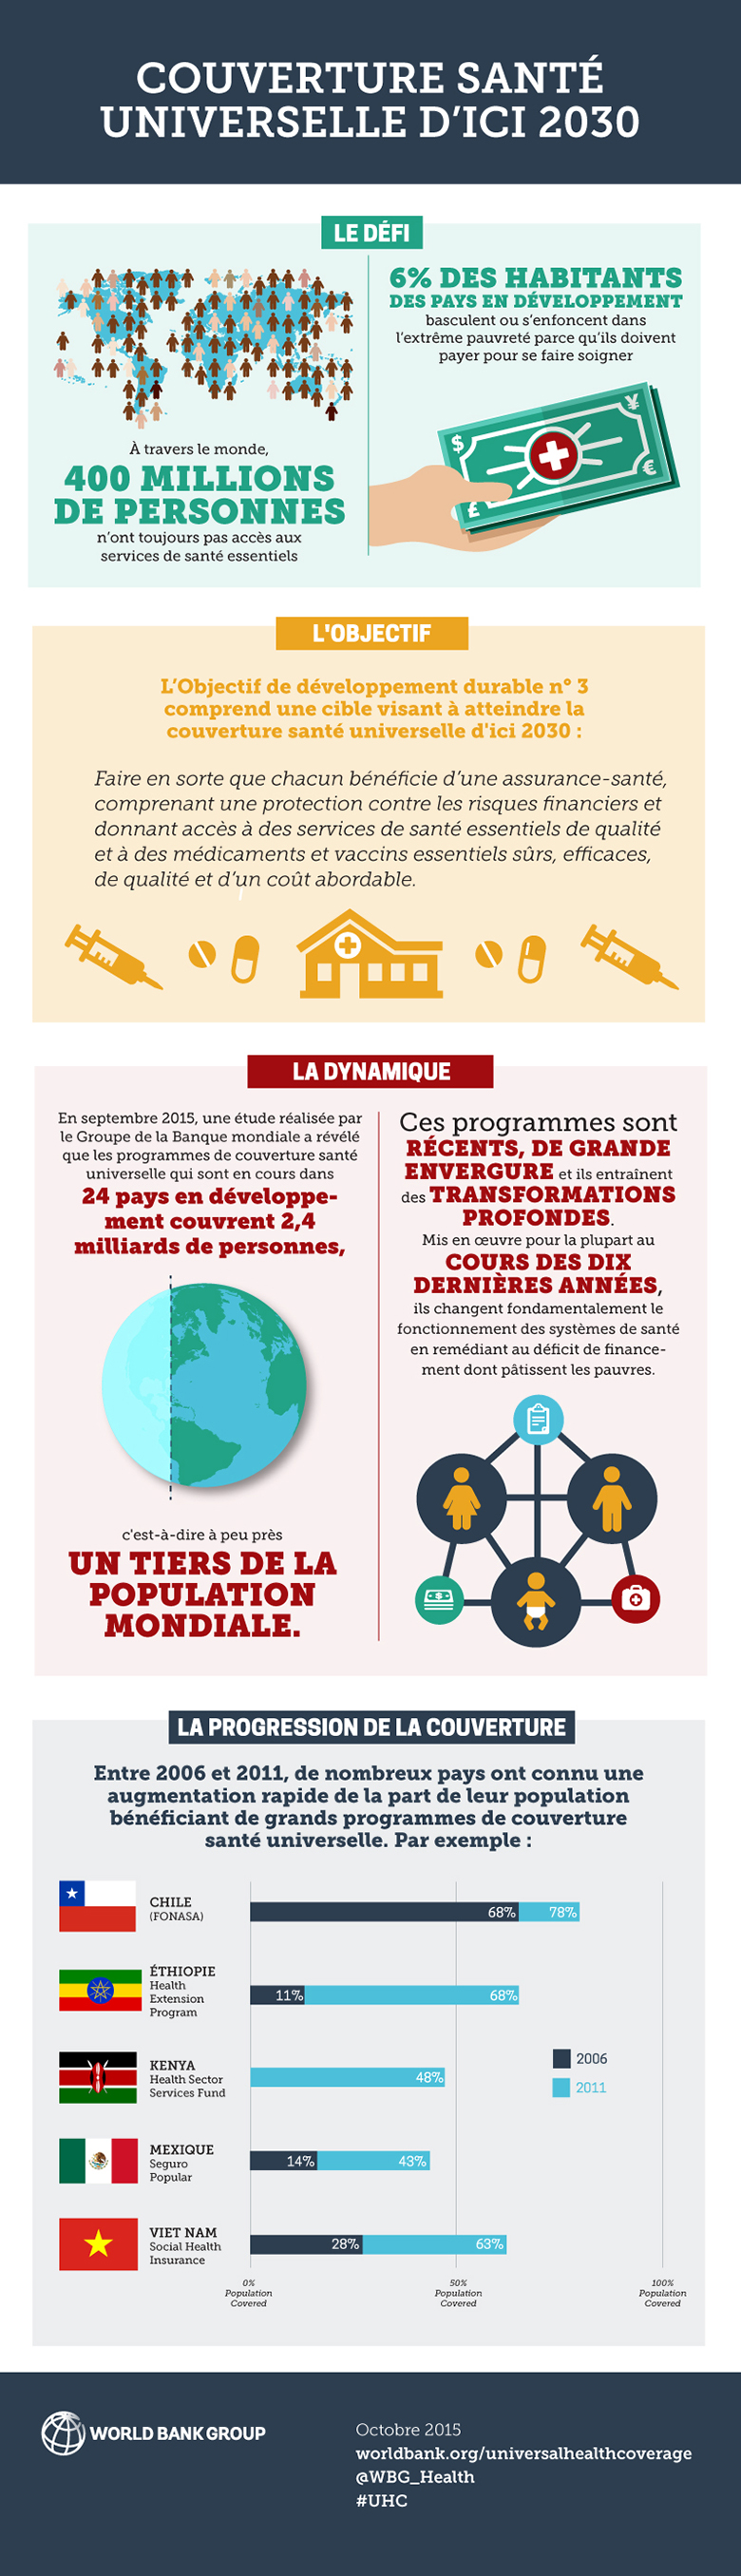 Infographic: Universal Health Coverage by 2030 - FR